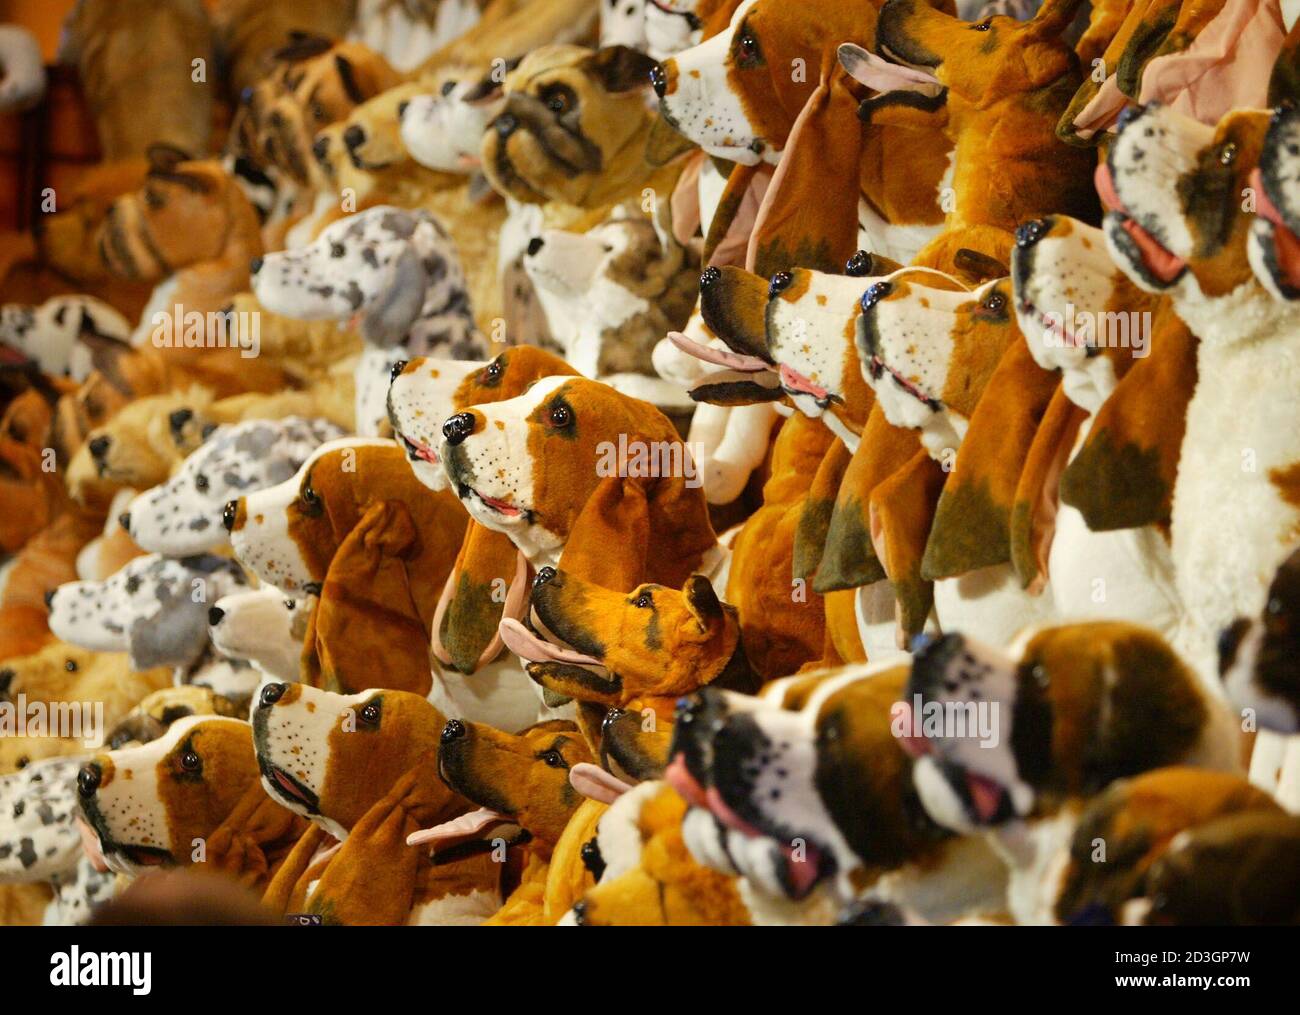 Stuffed toy dogs stand on display at the Crufts dog show in Birmingham, March 6, 2003. The 100th Crufts show, which was founded in 1891 by entrepreneur Charles Cruft, is expected to attract more than 170 breeds of dog who will compete for this year's best-in-show title, awarded on the competition's final day on Sunday. REUTERS/Peter Macdiarmid  PKM/MD/CRB Stock Photo